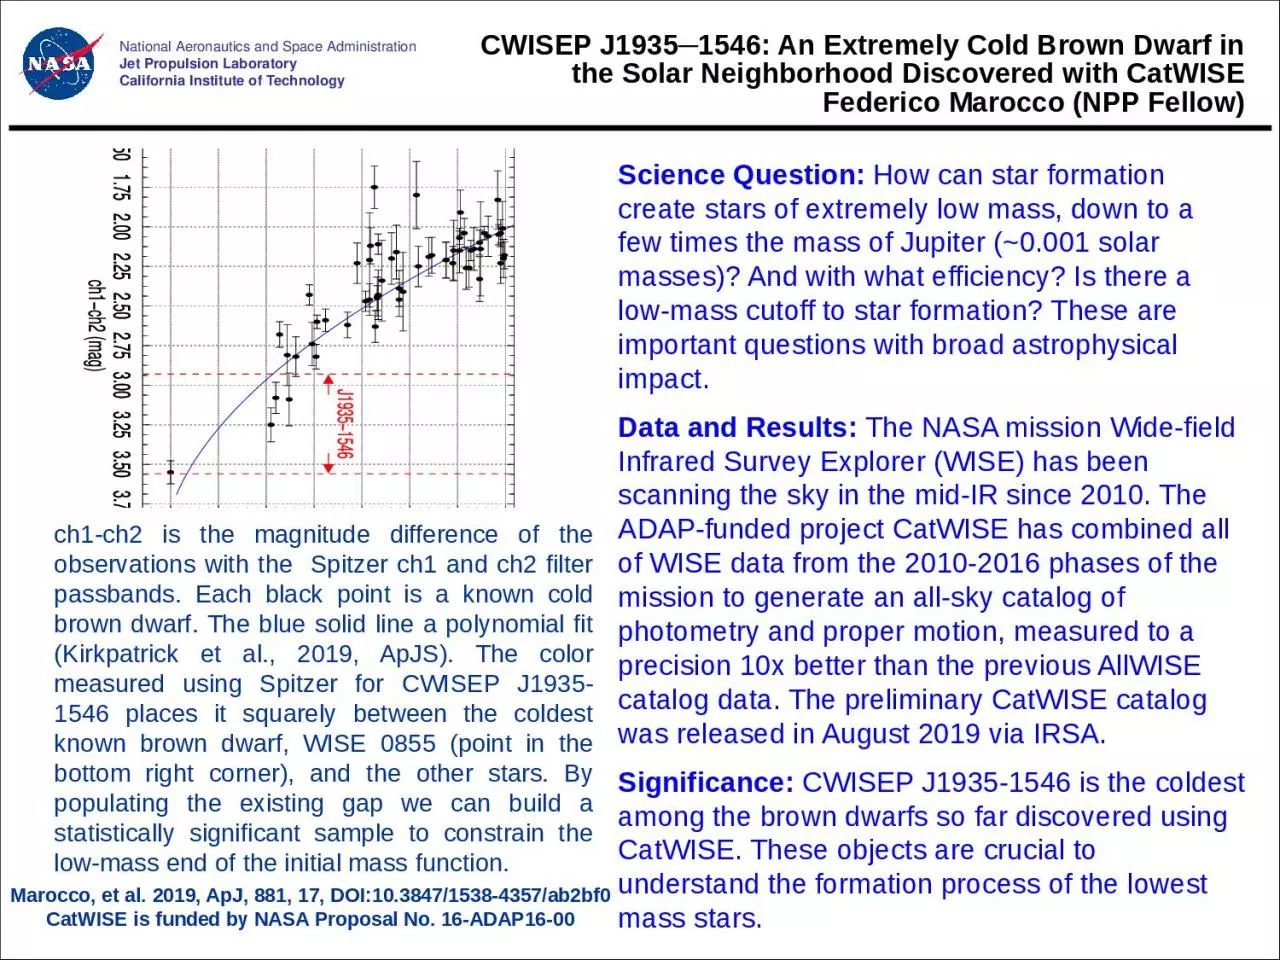 CWISEP J1935─1546: An Extremely Cold Brown Dwarf in the Solar Neighborhood Discovered